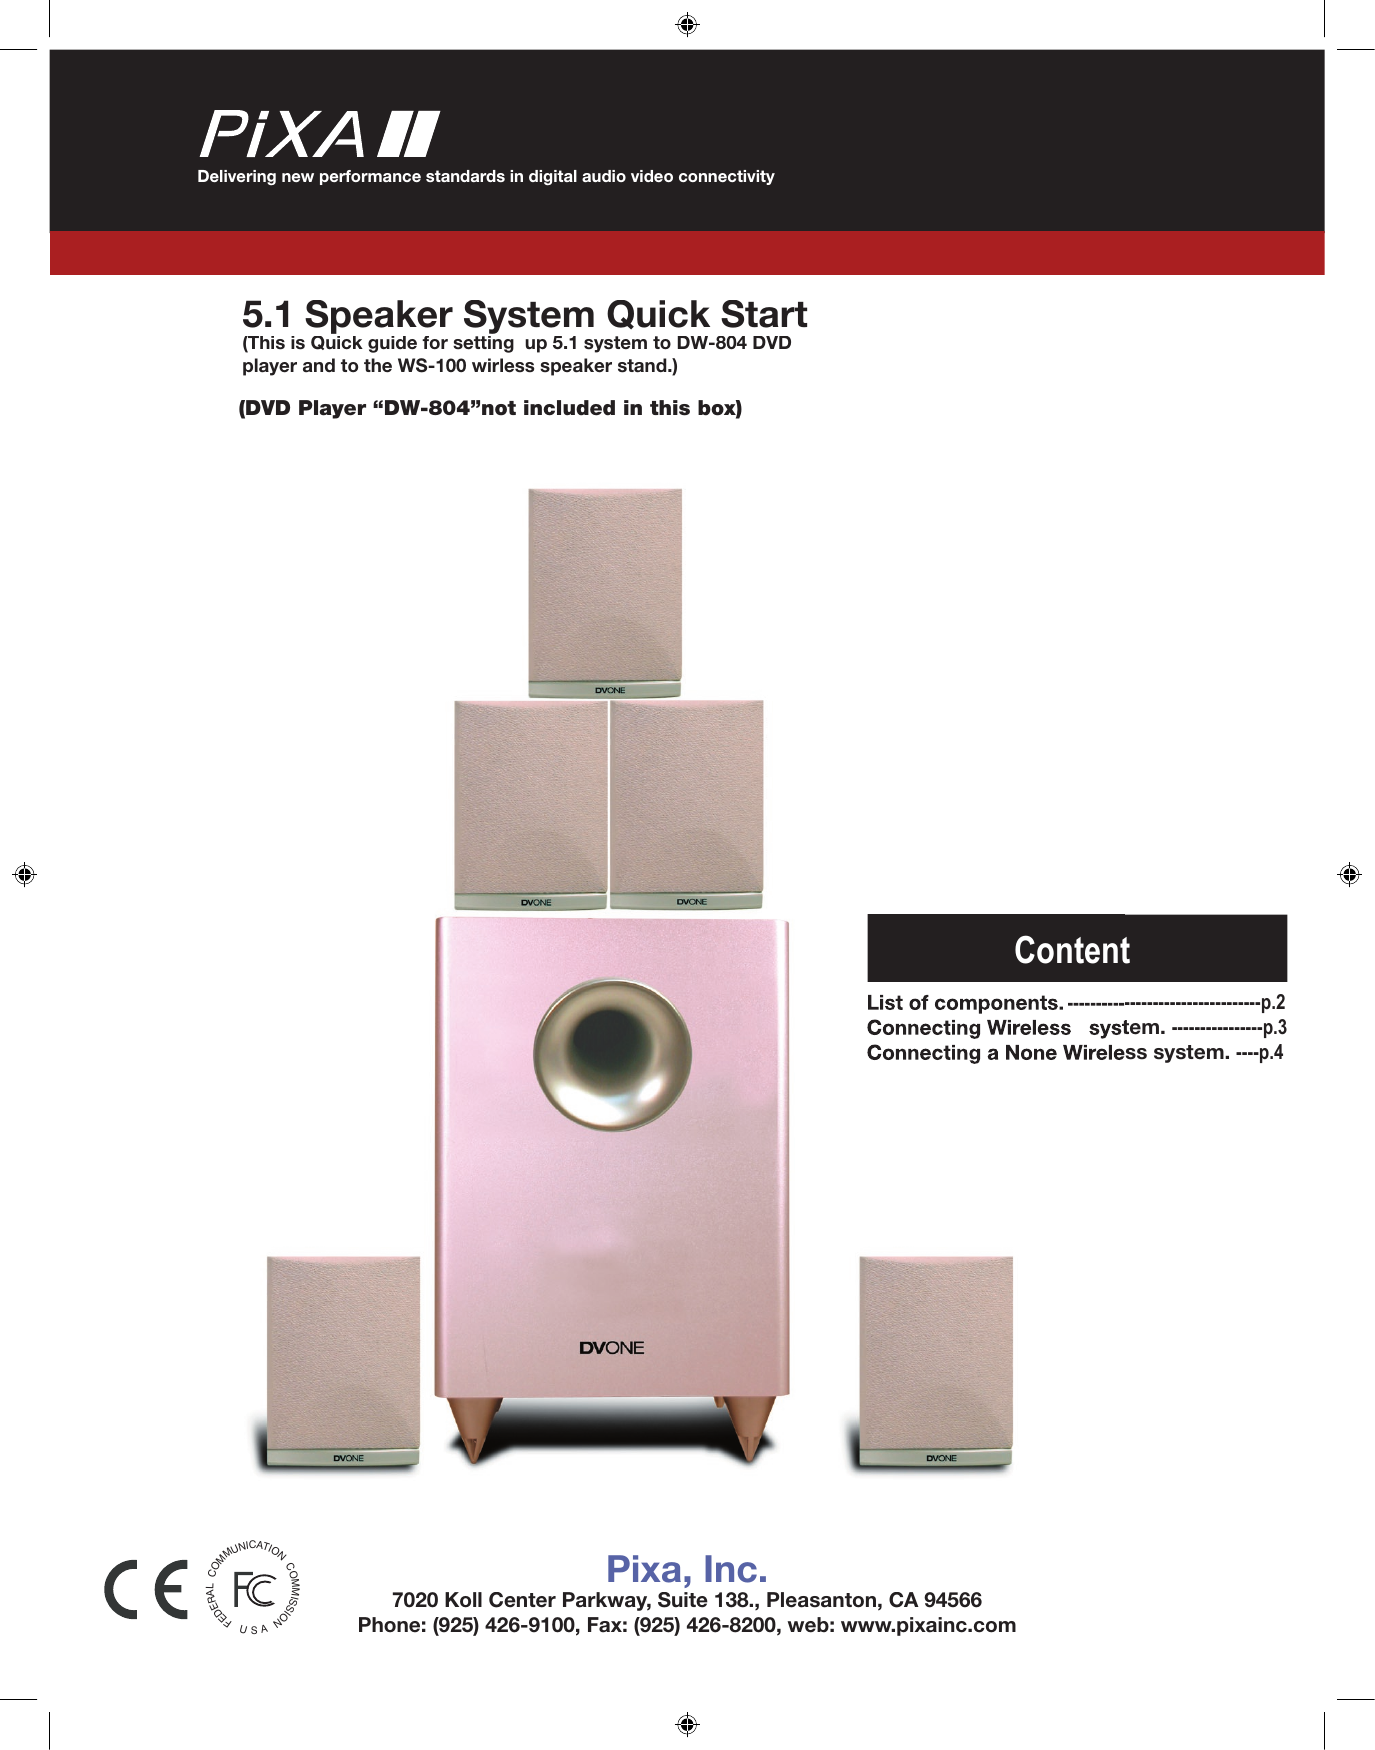 Delivering new performance standards in digital audio video connectivity5.1 Speaker System Quick Start (This is Quick guide for setting  up 5.1 system to DW-804 DVD player and to the WS-100 wirless speaker stand.)(DVD Player “DW-804”not included in this box)Pixa, Inc.7020 Koll Center Parkway, Suite 138., Pleasanton, CA 94566Phone: (925) 426-9100, Fax: (925) 426-8200, web: www.pixainc.comFEDERALCOMMUNICATIONCOMMISSIONUASList of components.----------------------------------p.2----------------------------------p.2Connecting Wireless   system.Connecting Wireless   system.----------------p.3Connecting a None Wireless system.Connecting a None Wireless system.----p.4Content